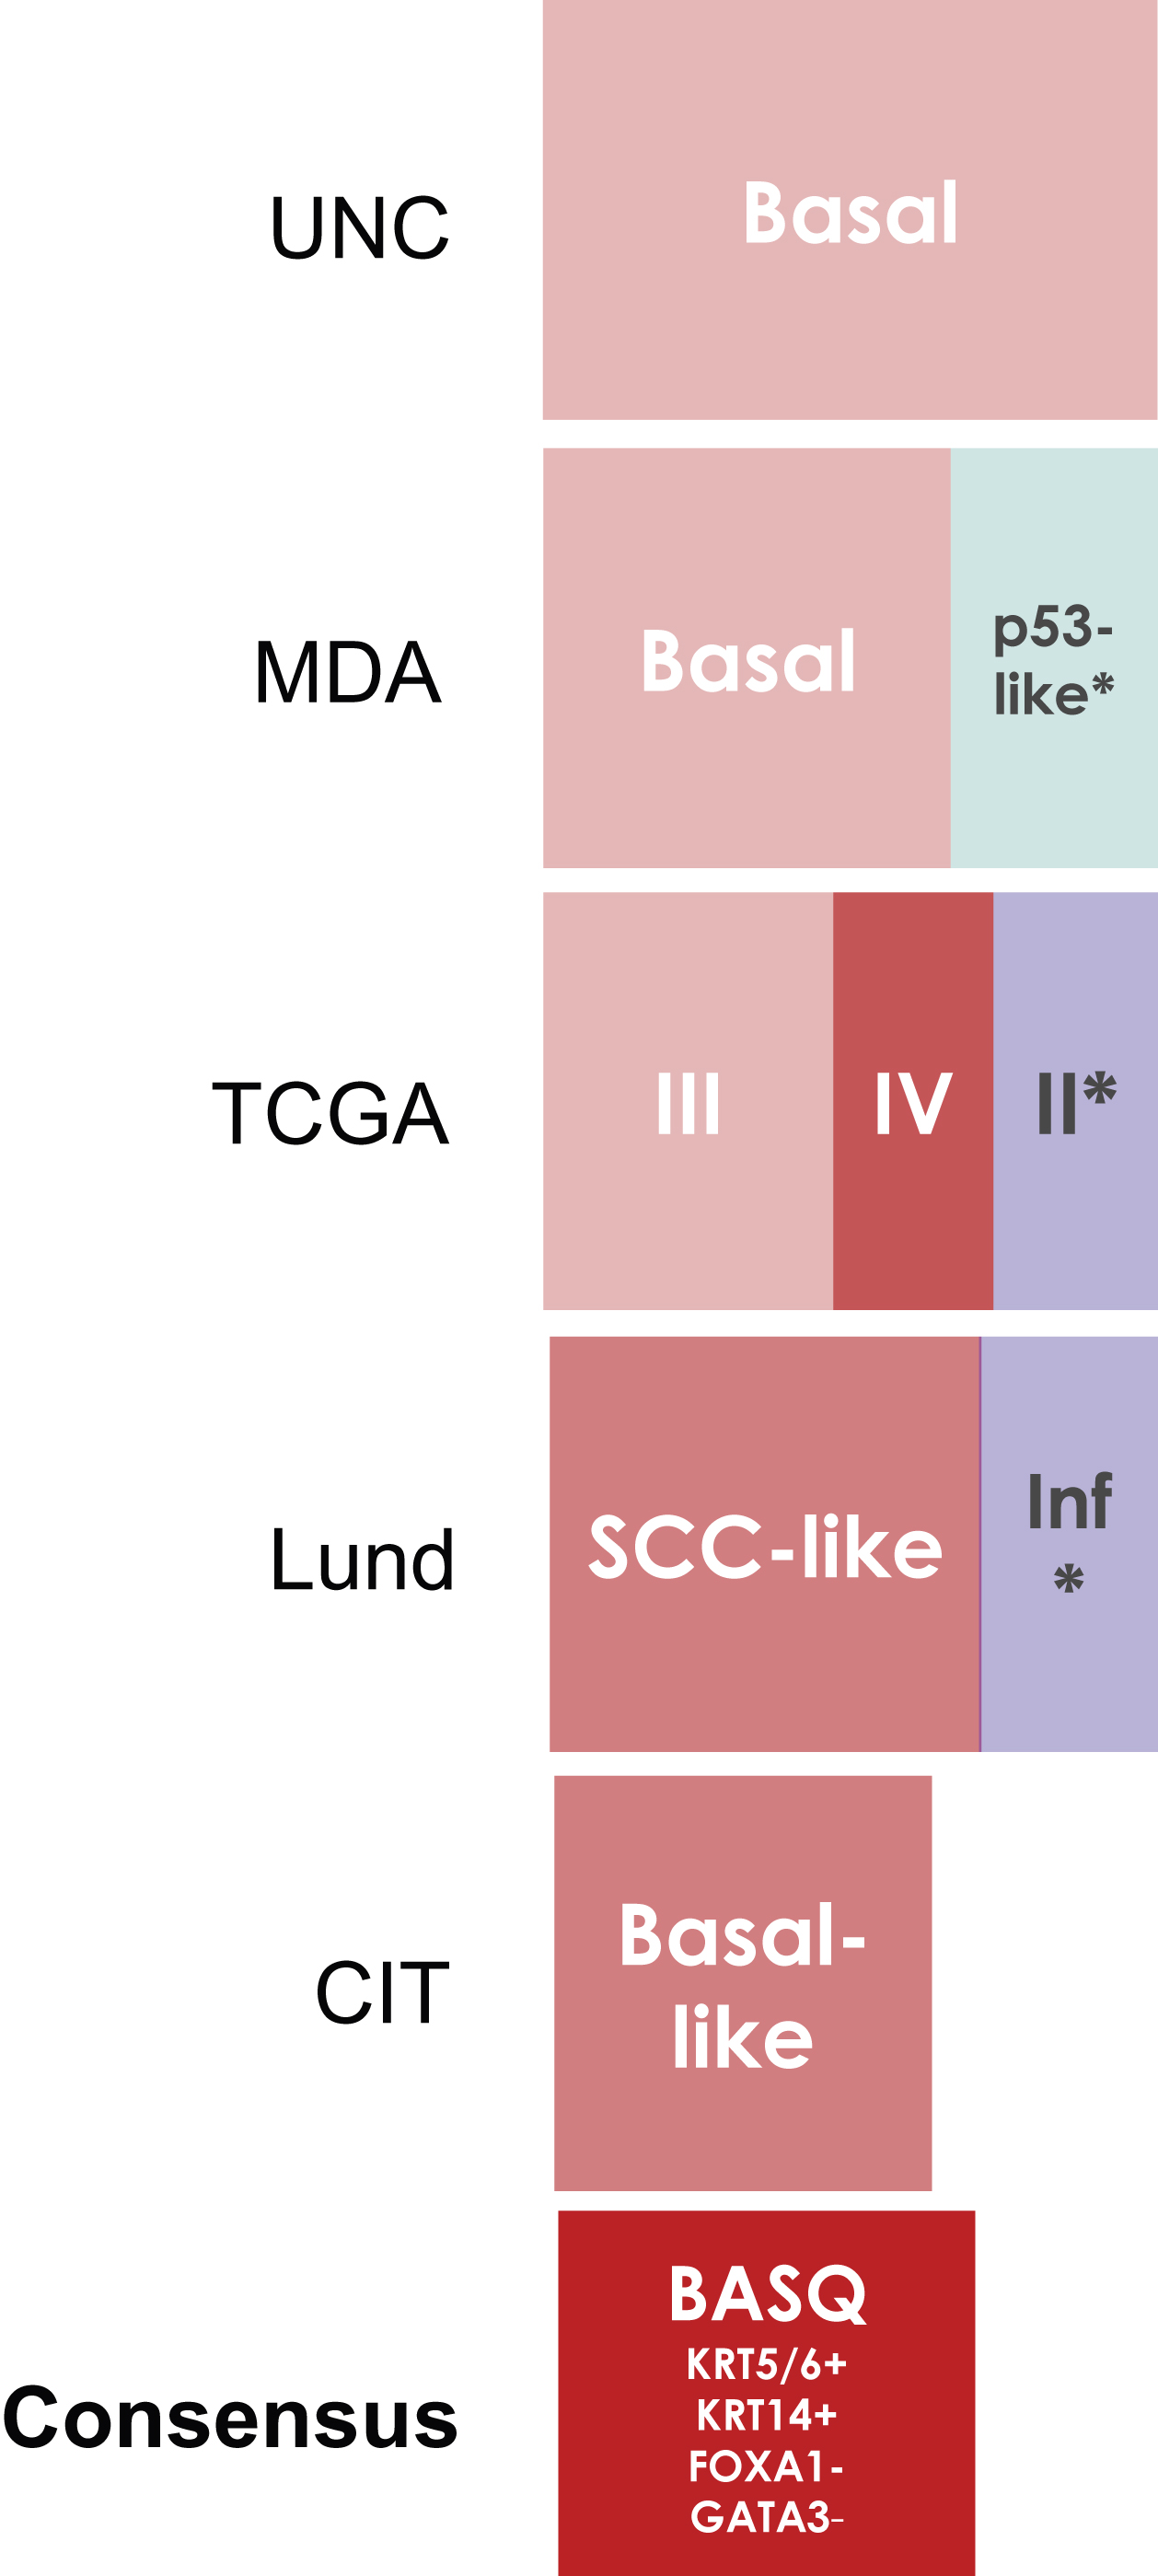 Comparison of the bladder cancer classifications as they relate to the “BASQ” (Basal-Squamous-like) consensus group. In red background, the subtypes that are enriched in this group. Tumor subclasses in other colors (p53-like, TCGA II, Infiltrated) comprise samples that would be included in the BASQ group and others that would not. Tumors in these three categories also express markers typical of urothelial differentiation to a variable extent. In red, the consensus definition of the “BASQ” subtype.